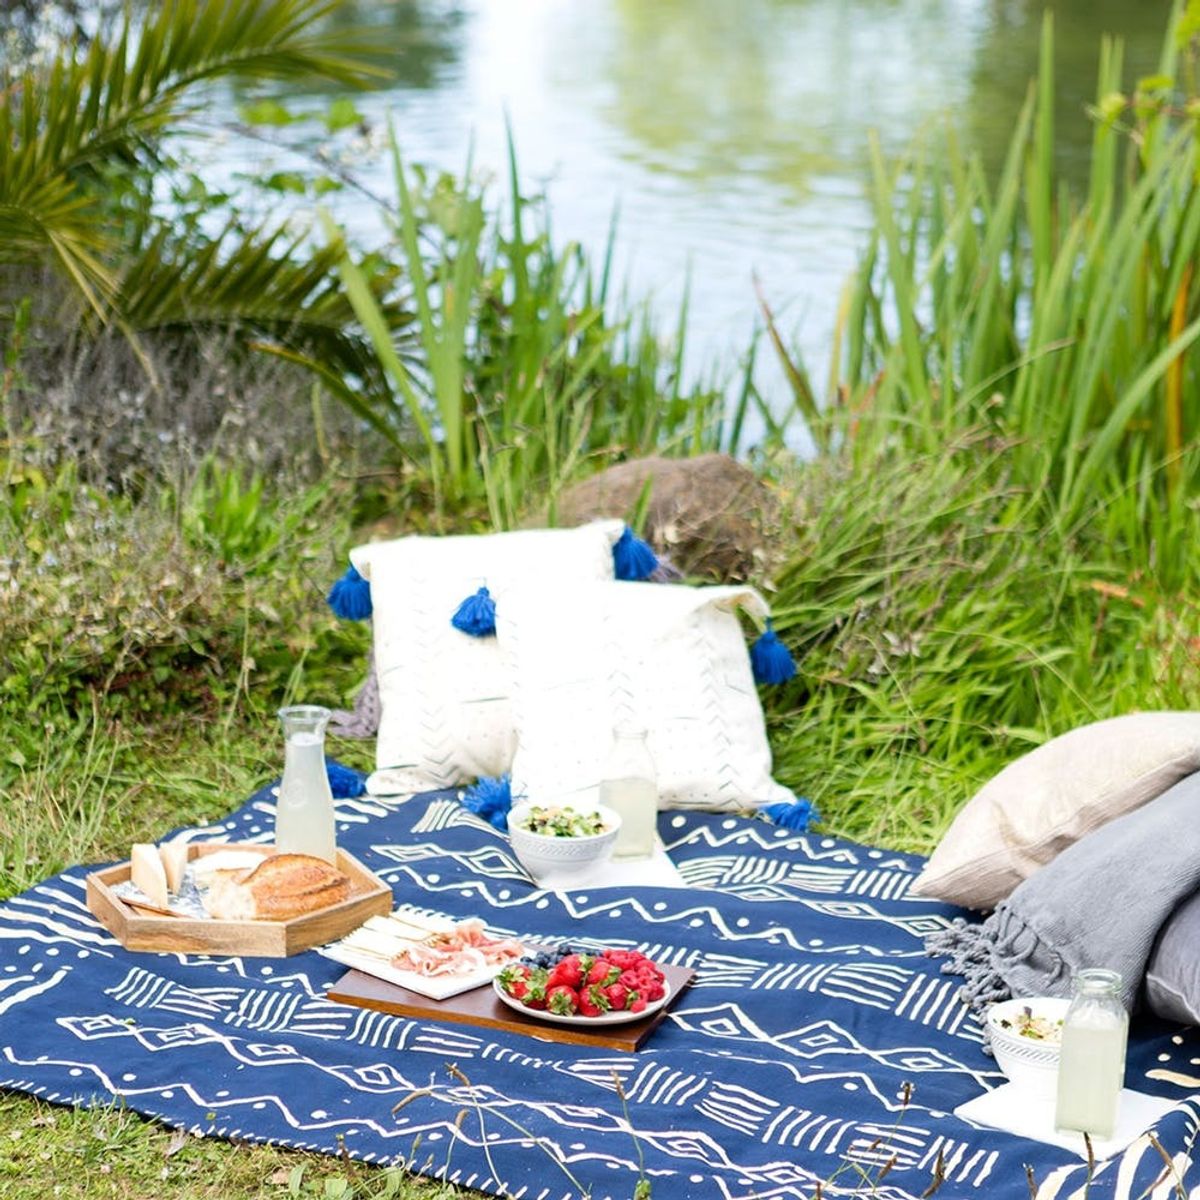 Create This Mudcloth-Inspired Picnic Blanket Using a Bleach Pen